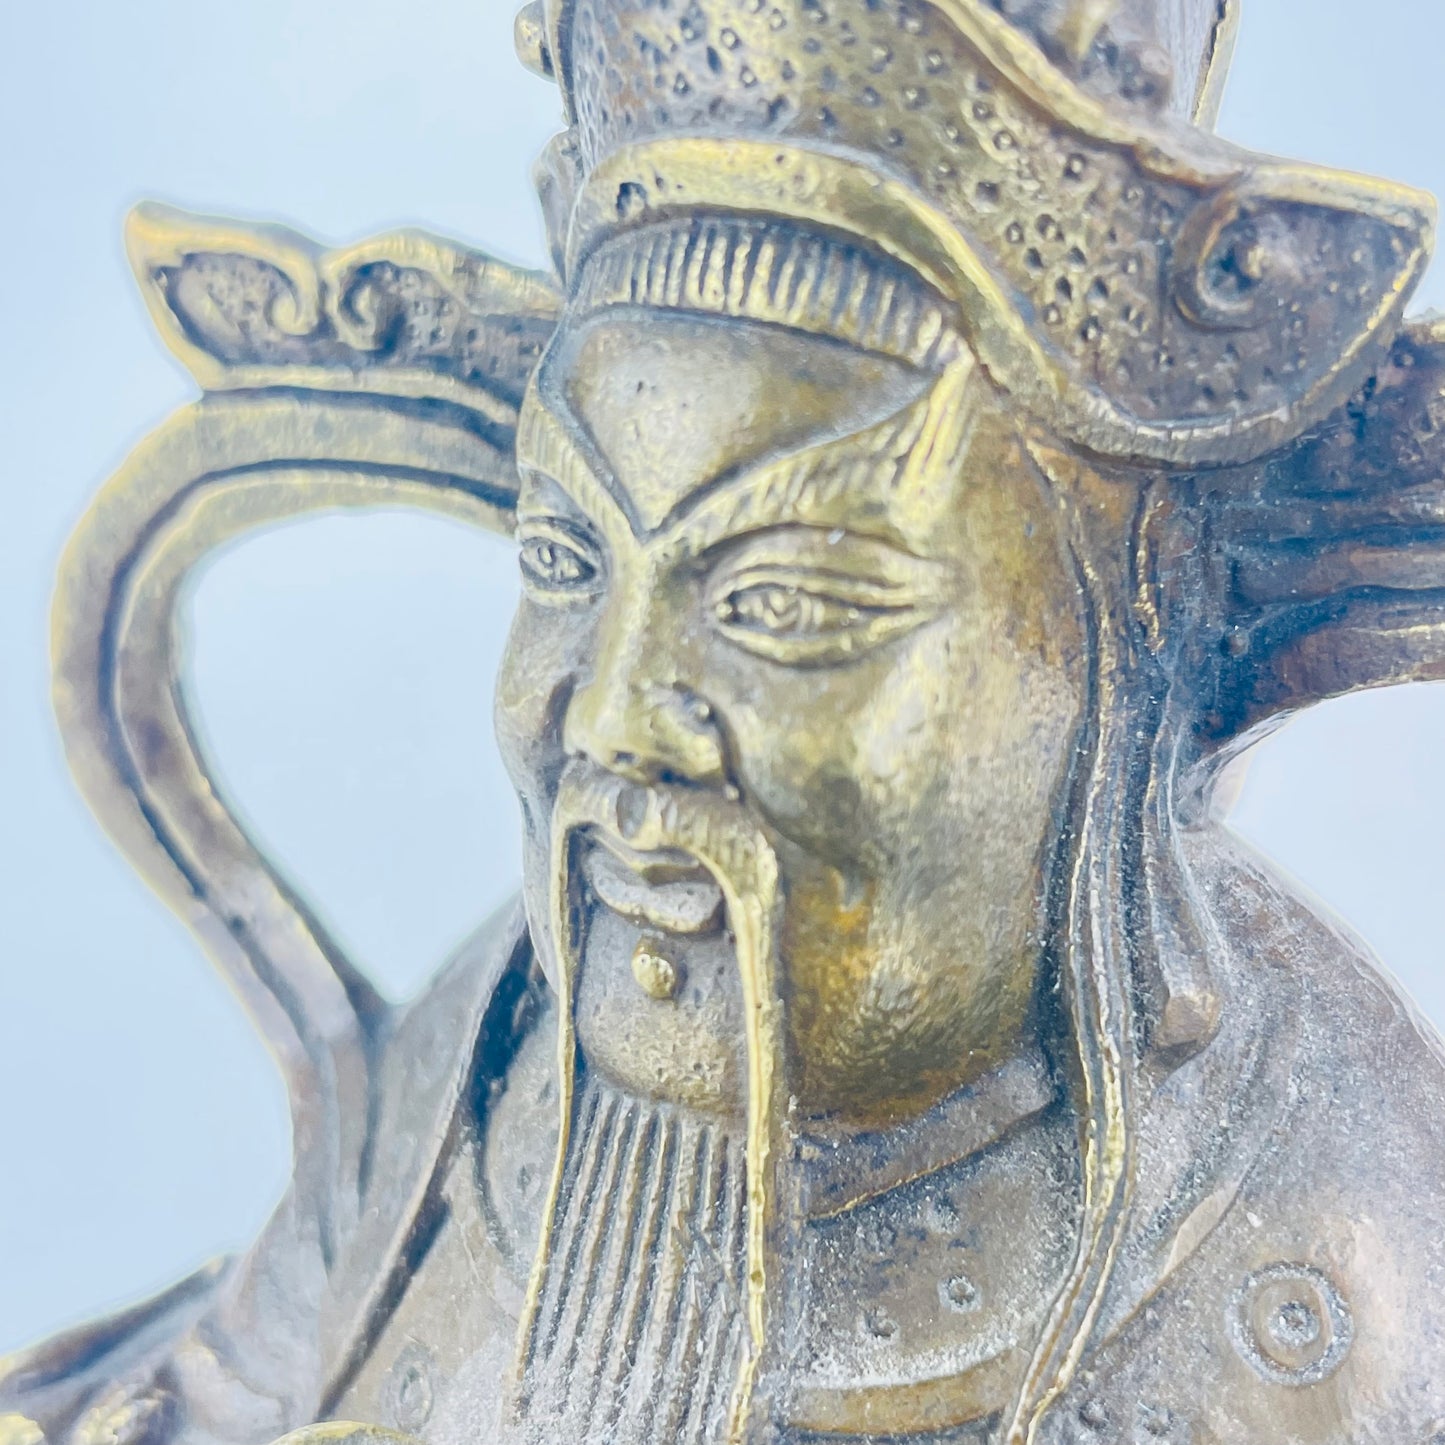 Vintage Chinese Bronze Statue of Yuanbao the Money God